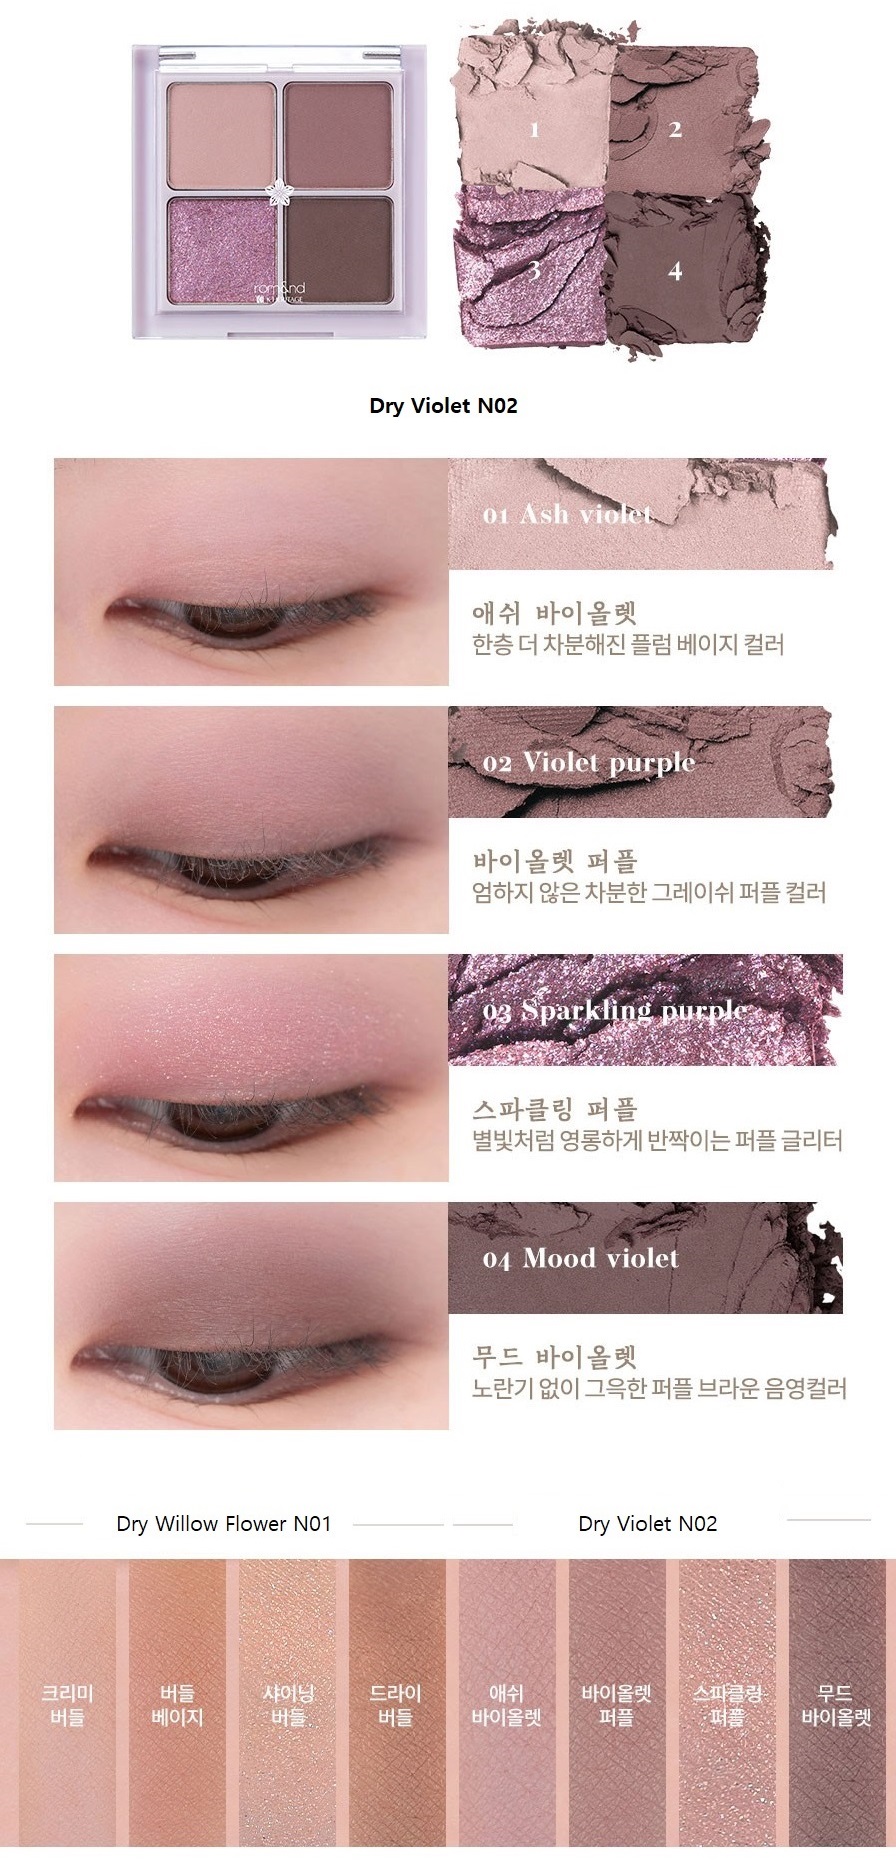 ROMAND Better Than Eyes Hanbok Project Dry Violet N02 6g